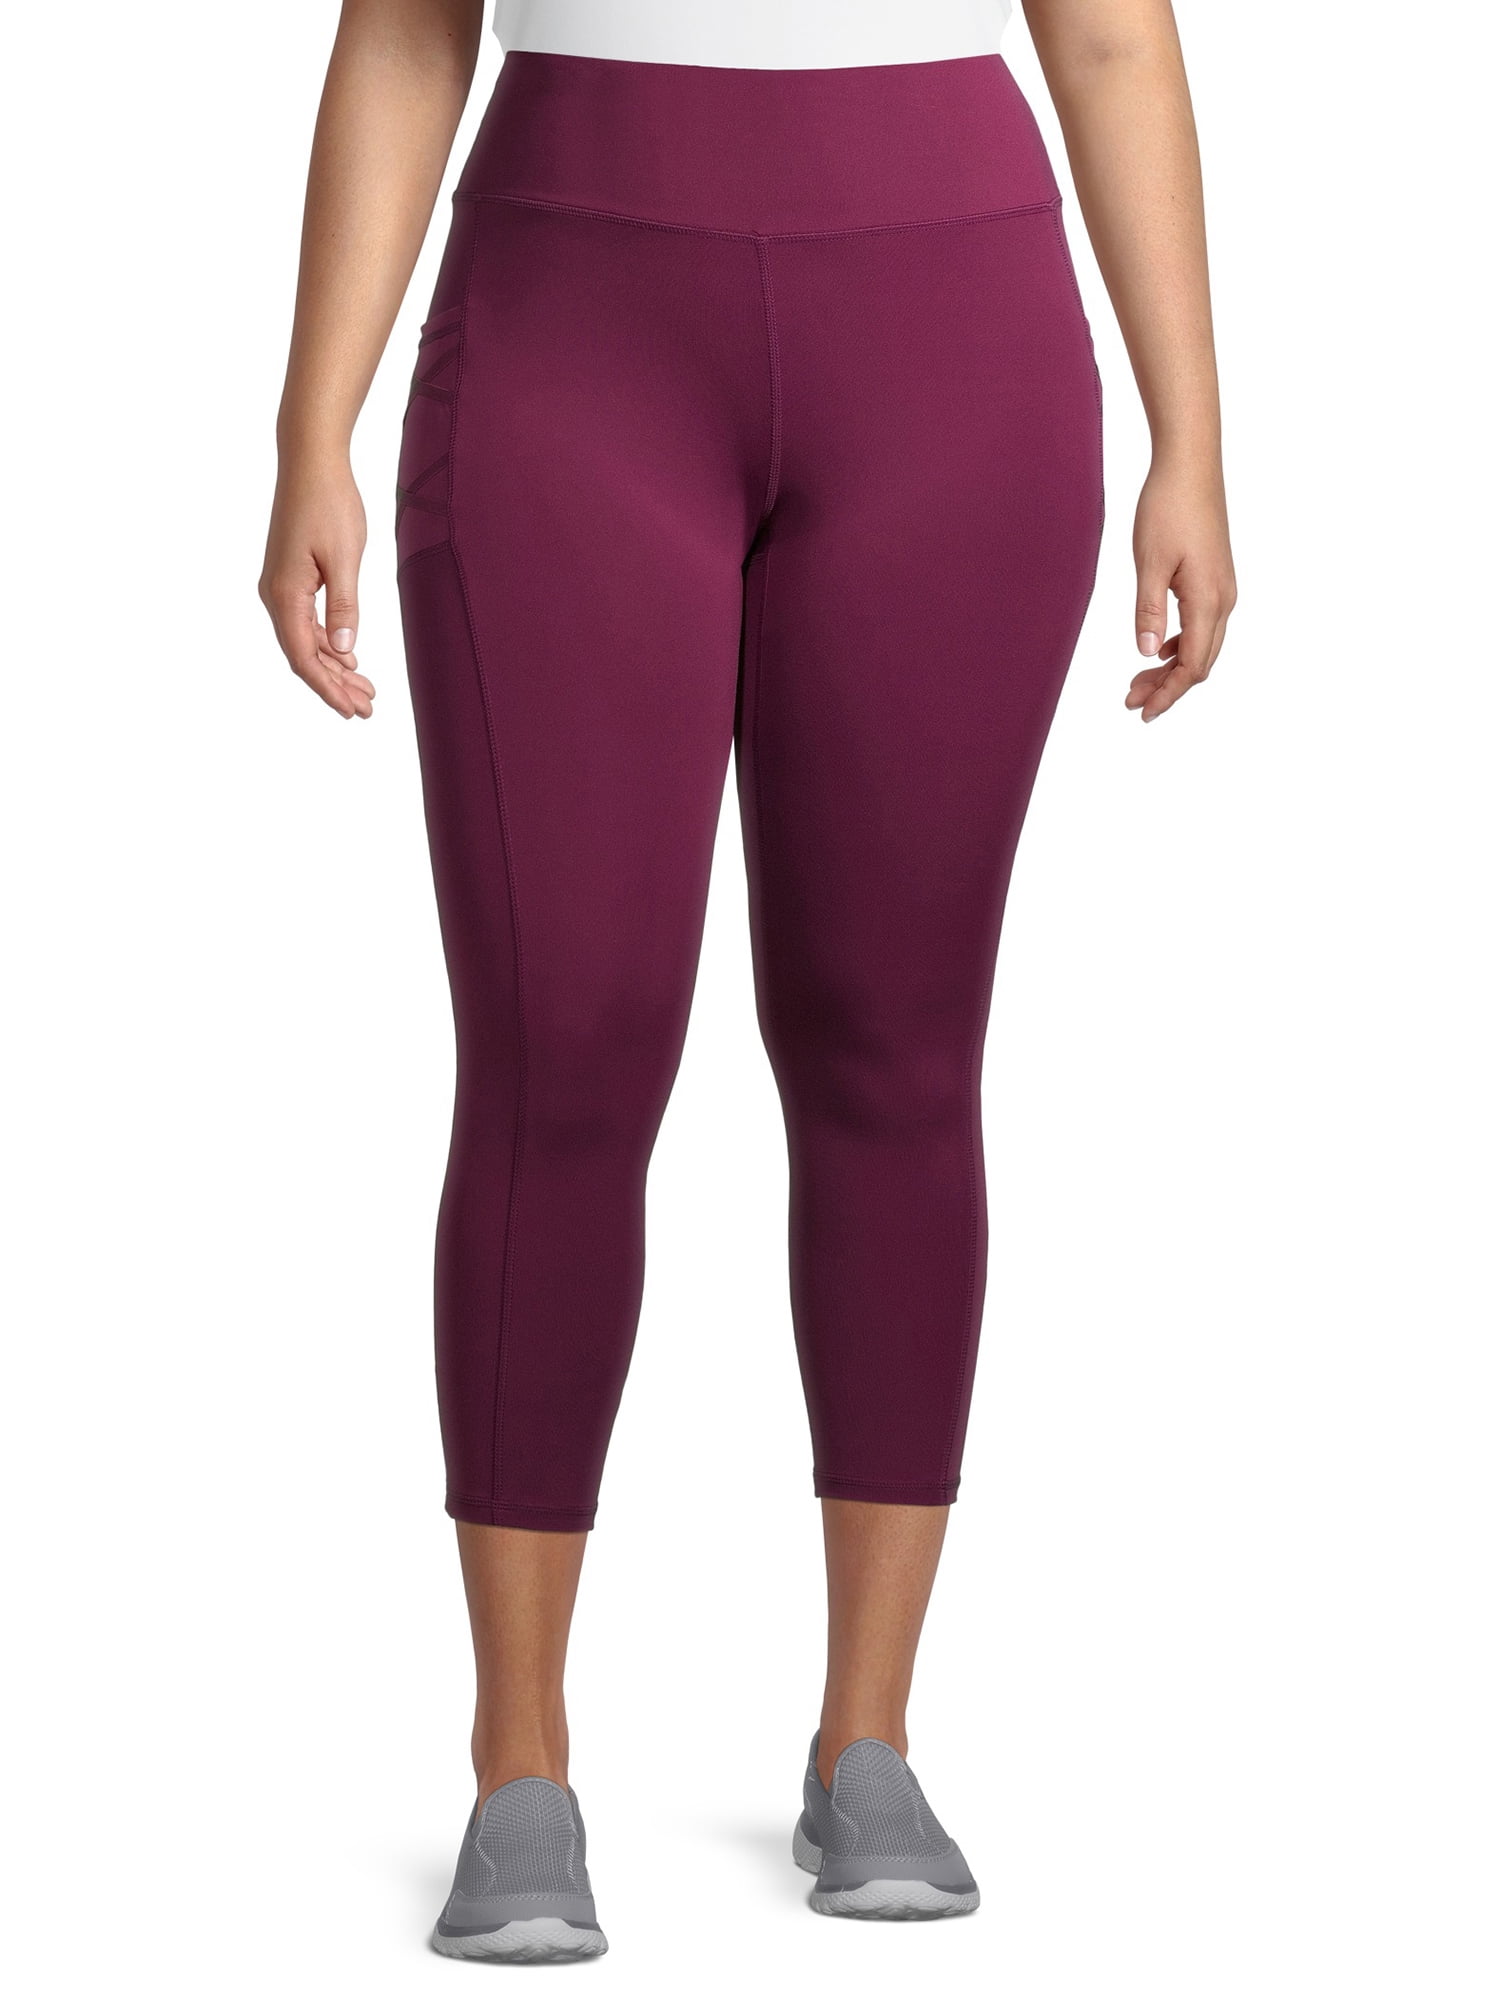 RAYPOSE Womens Workout Capri Leggings for Women with Pockets Plus